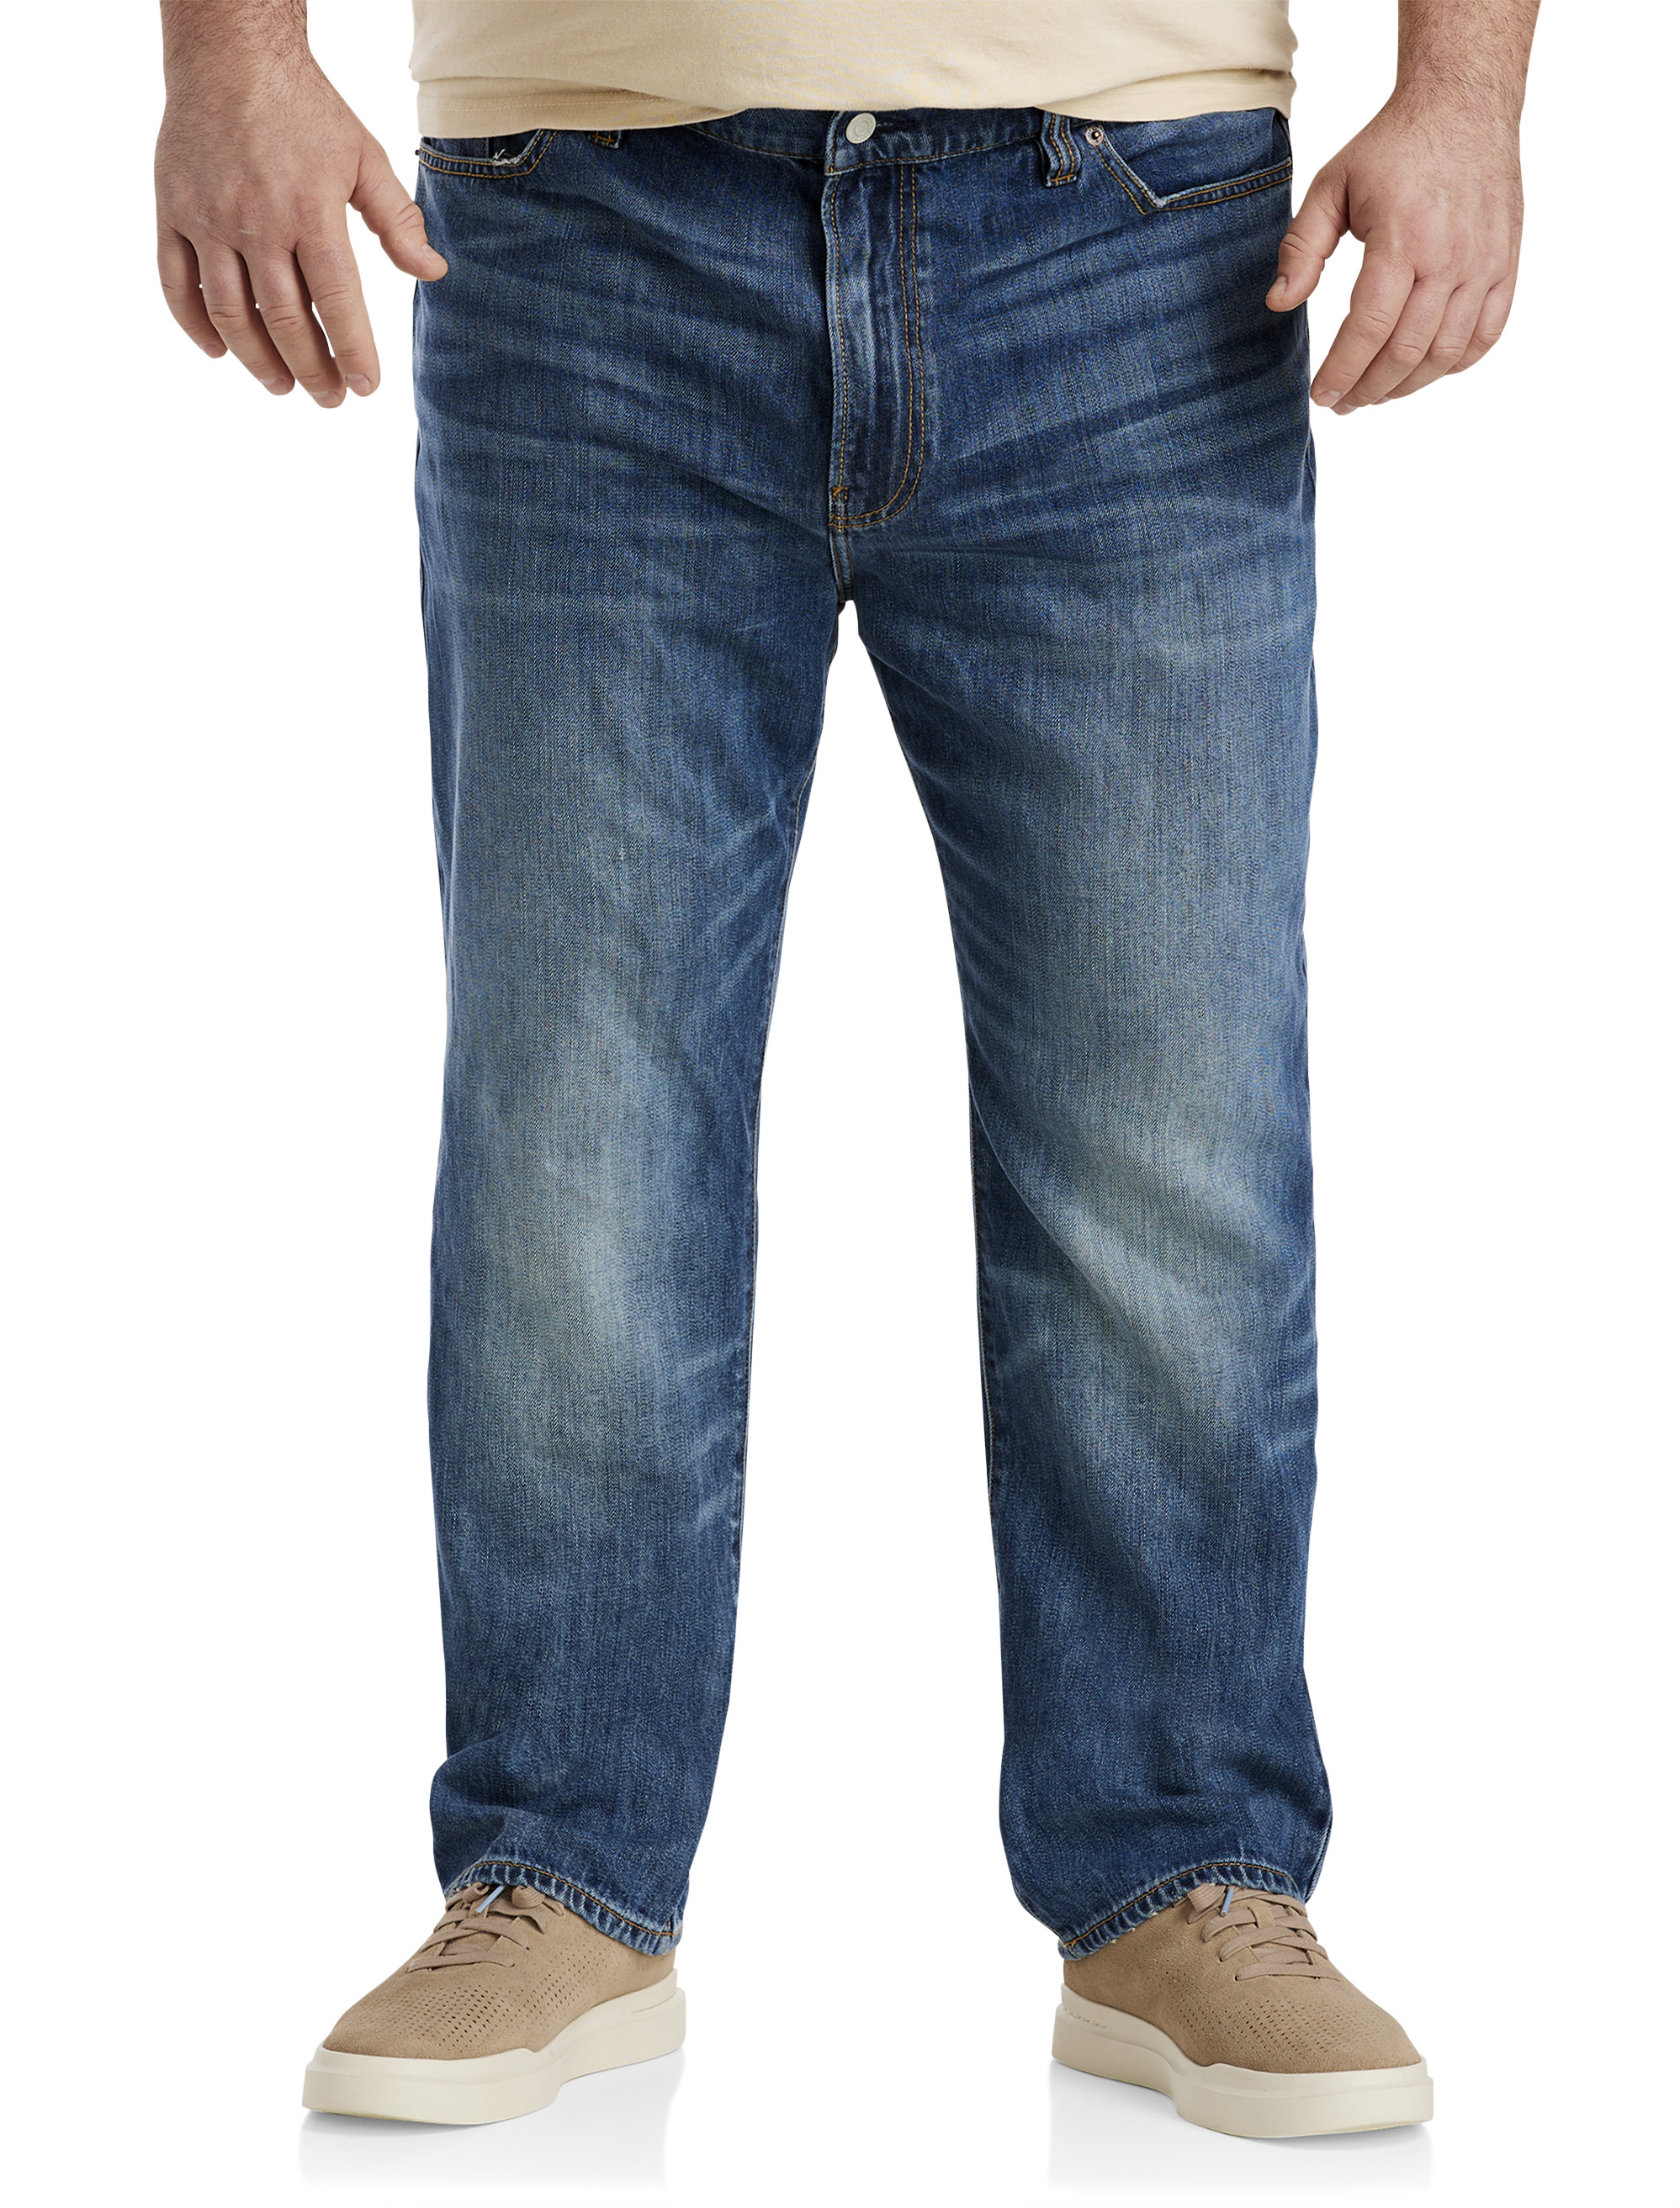  Lucky Brand Mens Big & Tall 410 Athletic Fit Jean